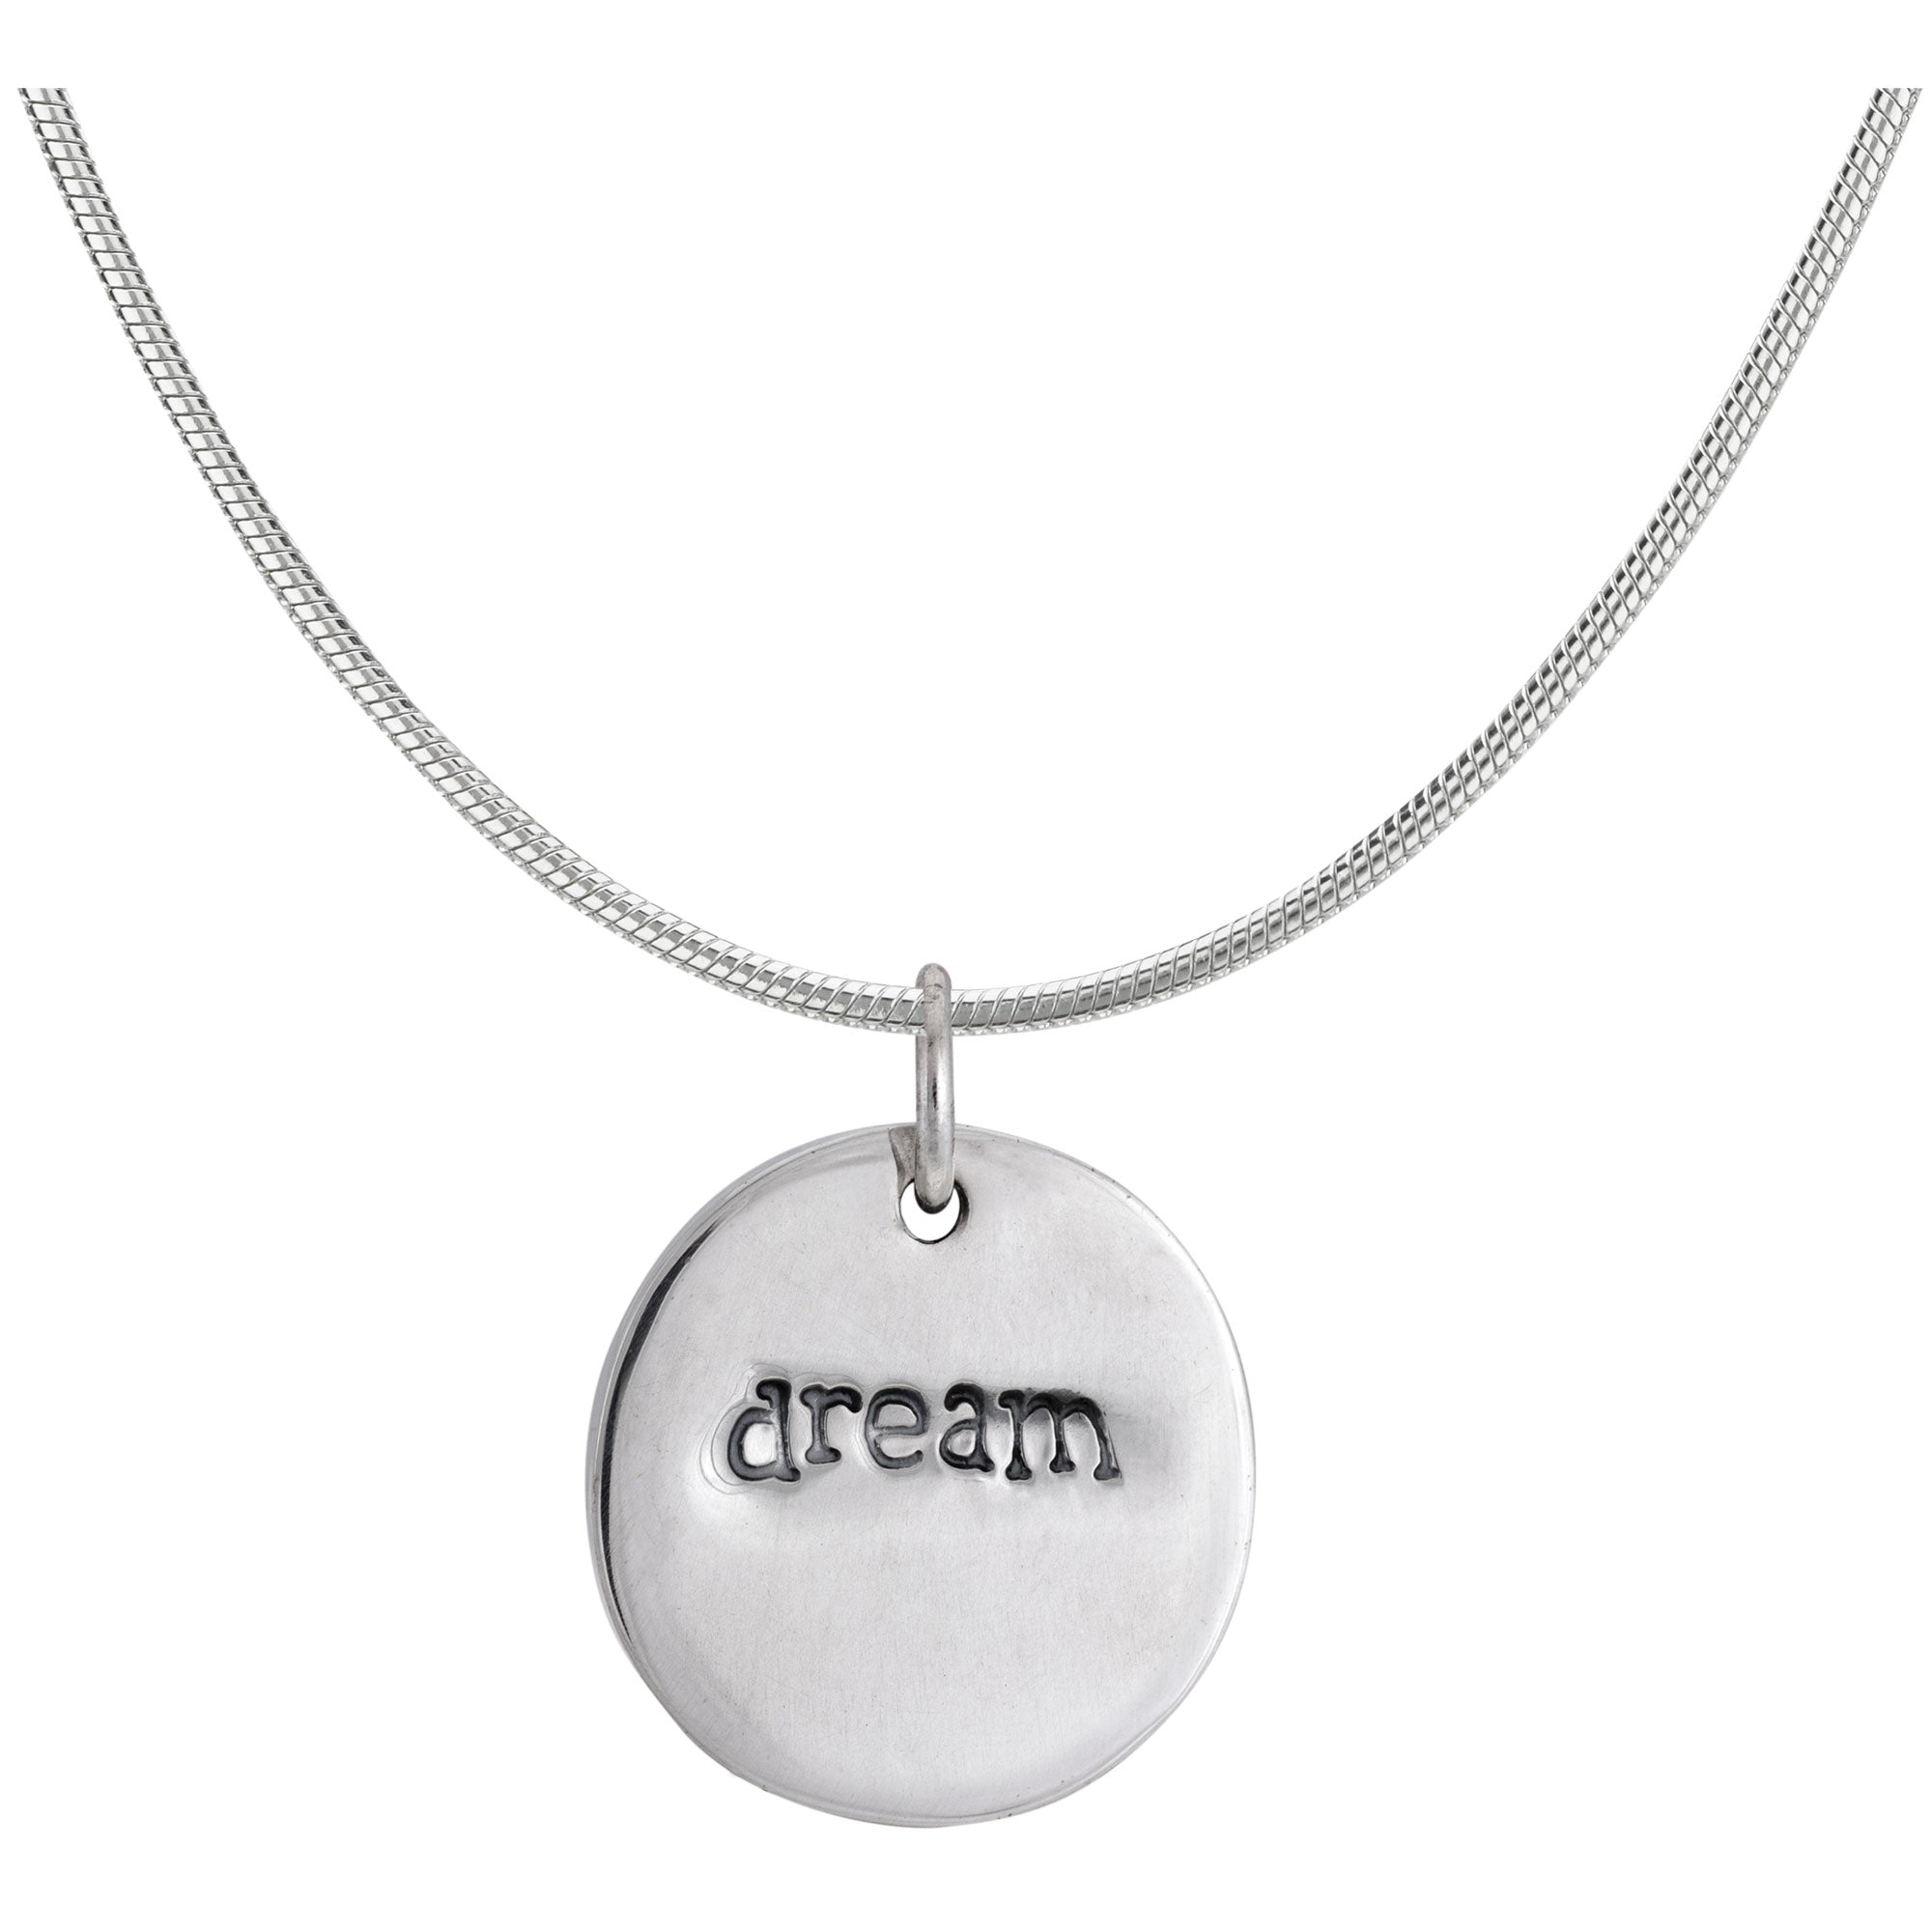 Believe Dream Double Sided Sterling Necklace - With Diamond Cut Chain